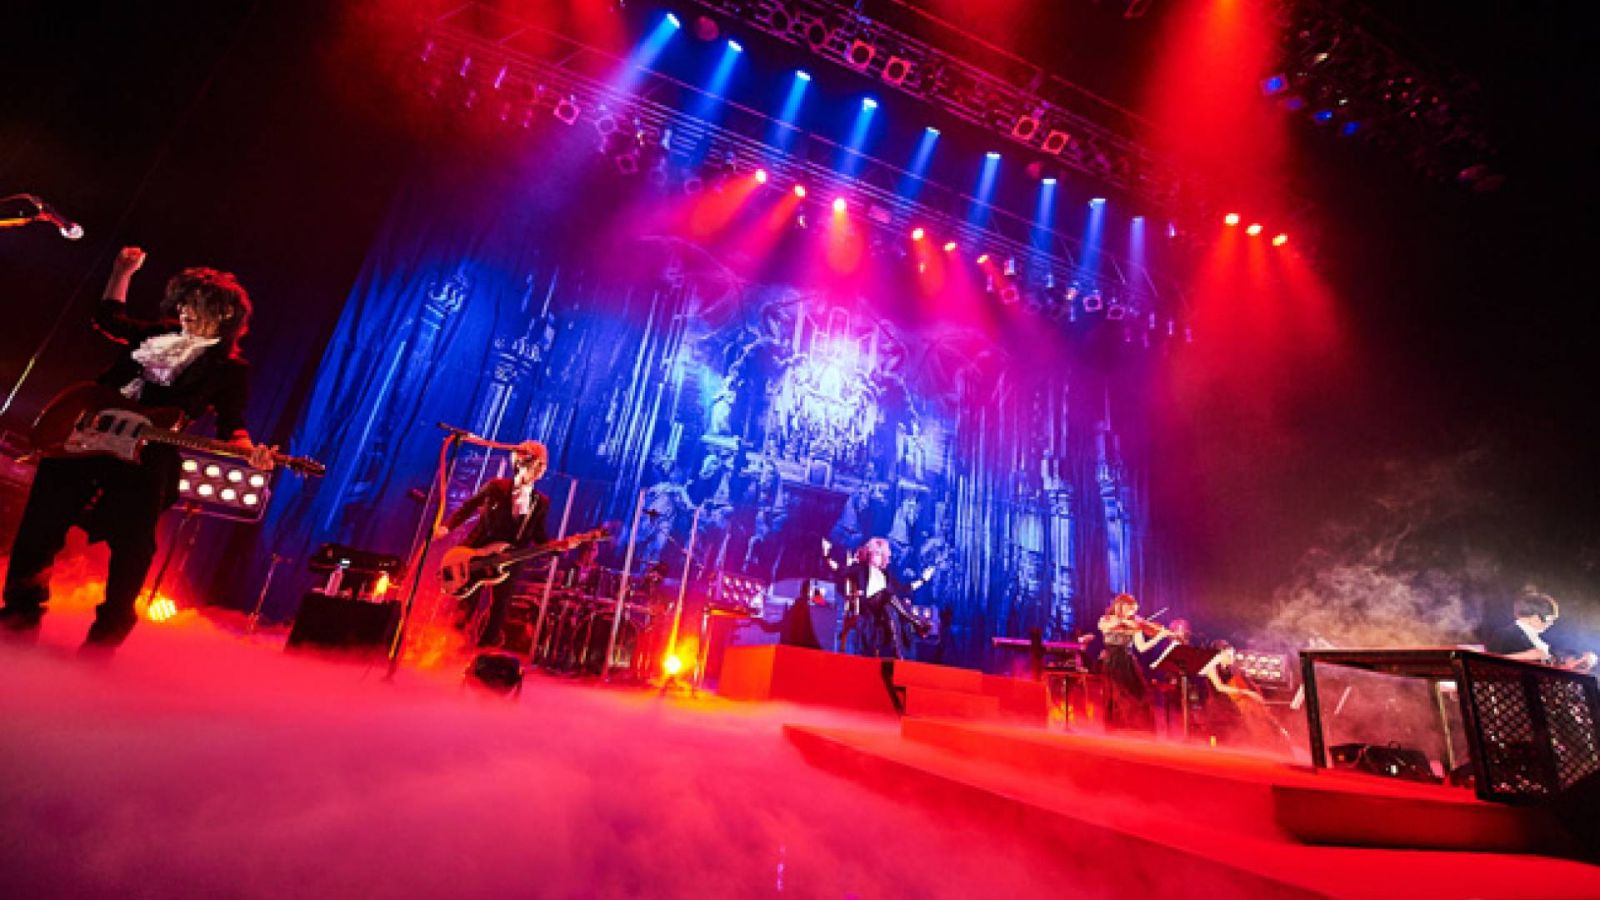 KAMIJO “Epic Rock Orchestra” at Zepp DiverCity © CHATEAU AGENCY. All rights reserved.